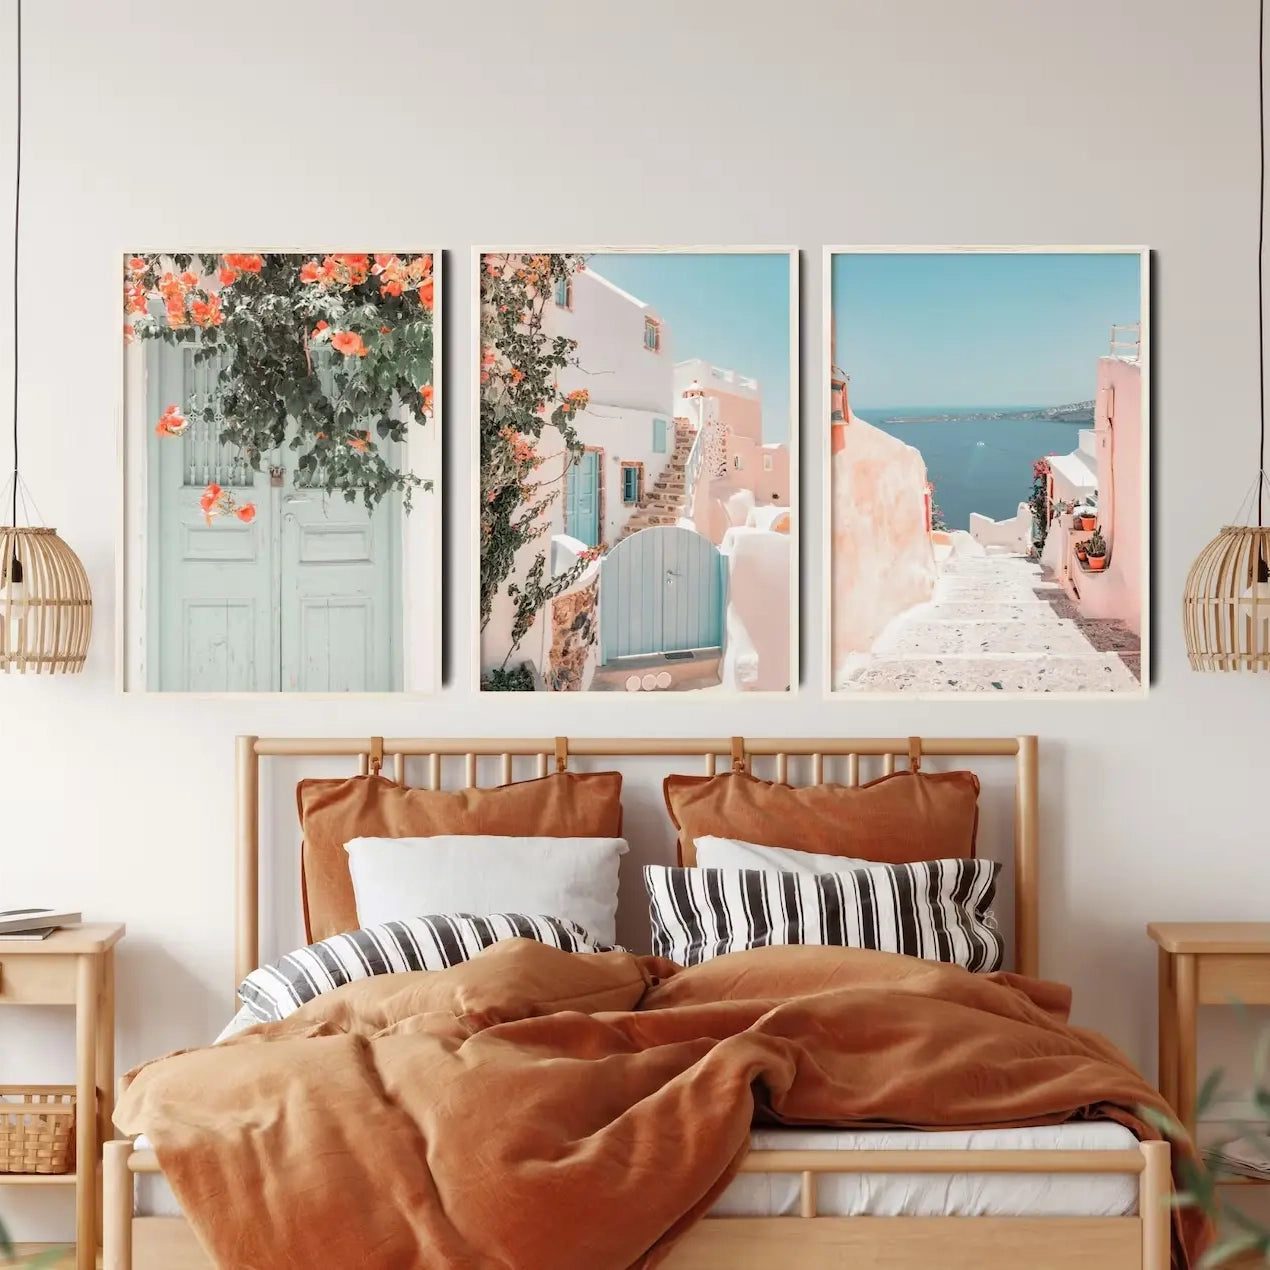 Greece Set of 3 Wall Art Posters (1)